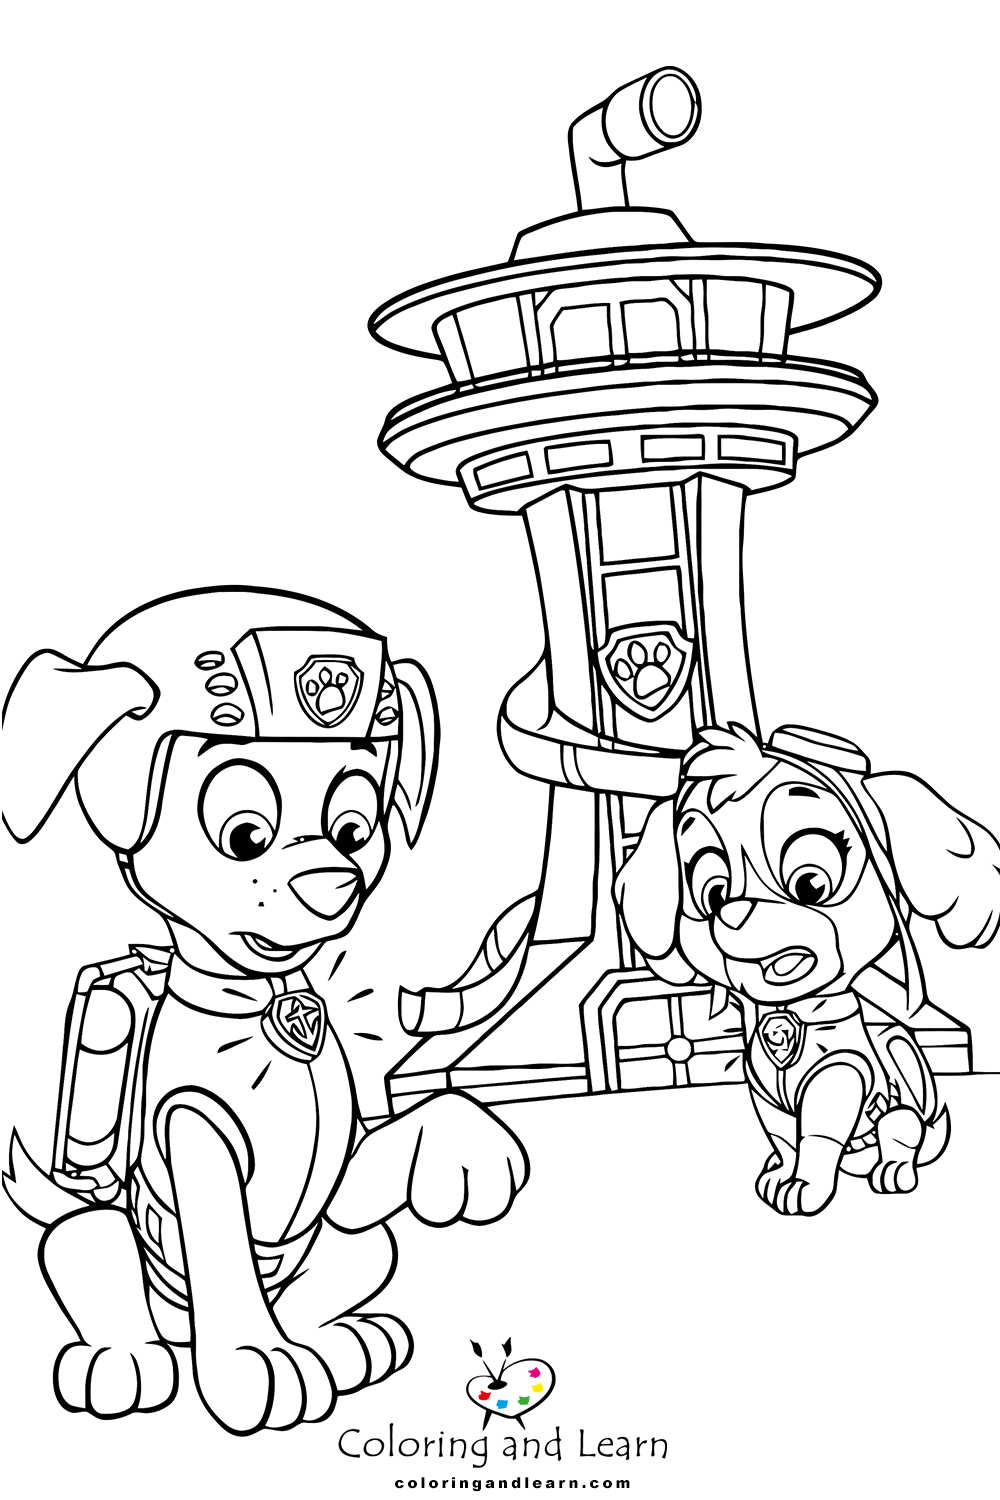 Paw Patrol Tracker Coloring Pages - 4 Free Printable Coloring